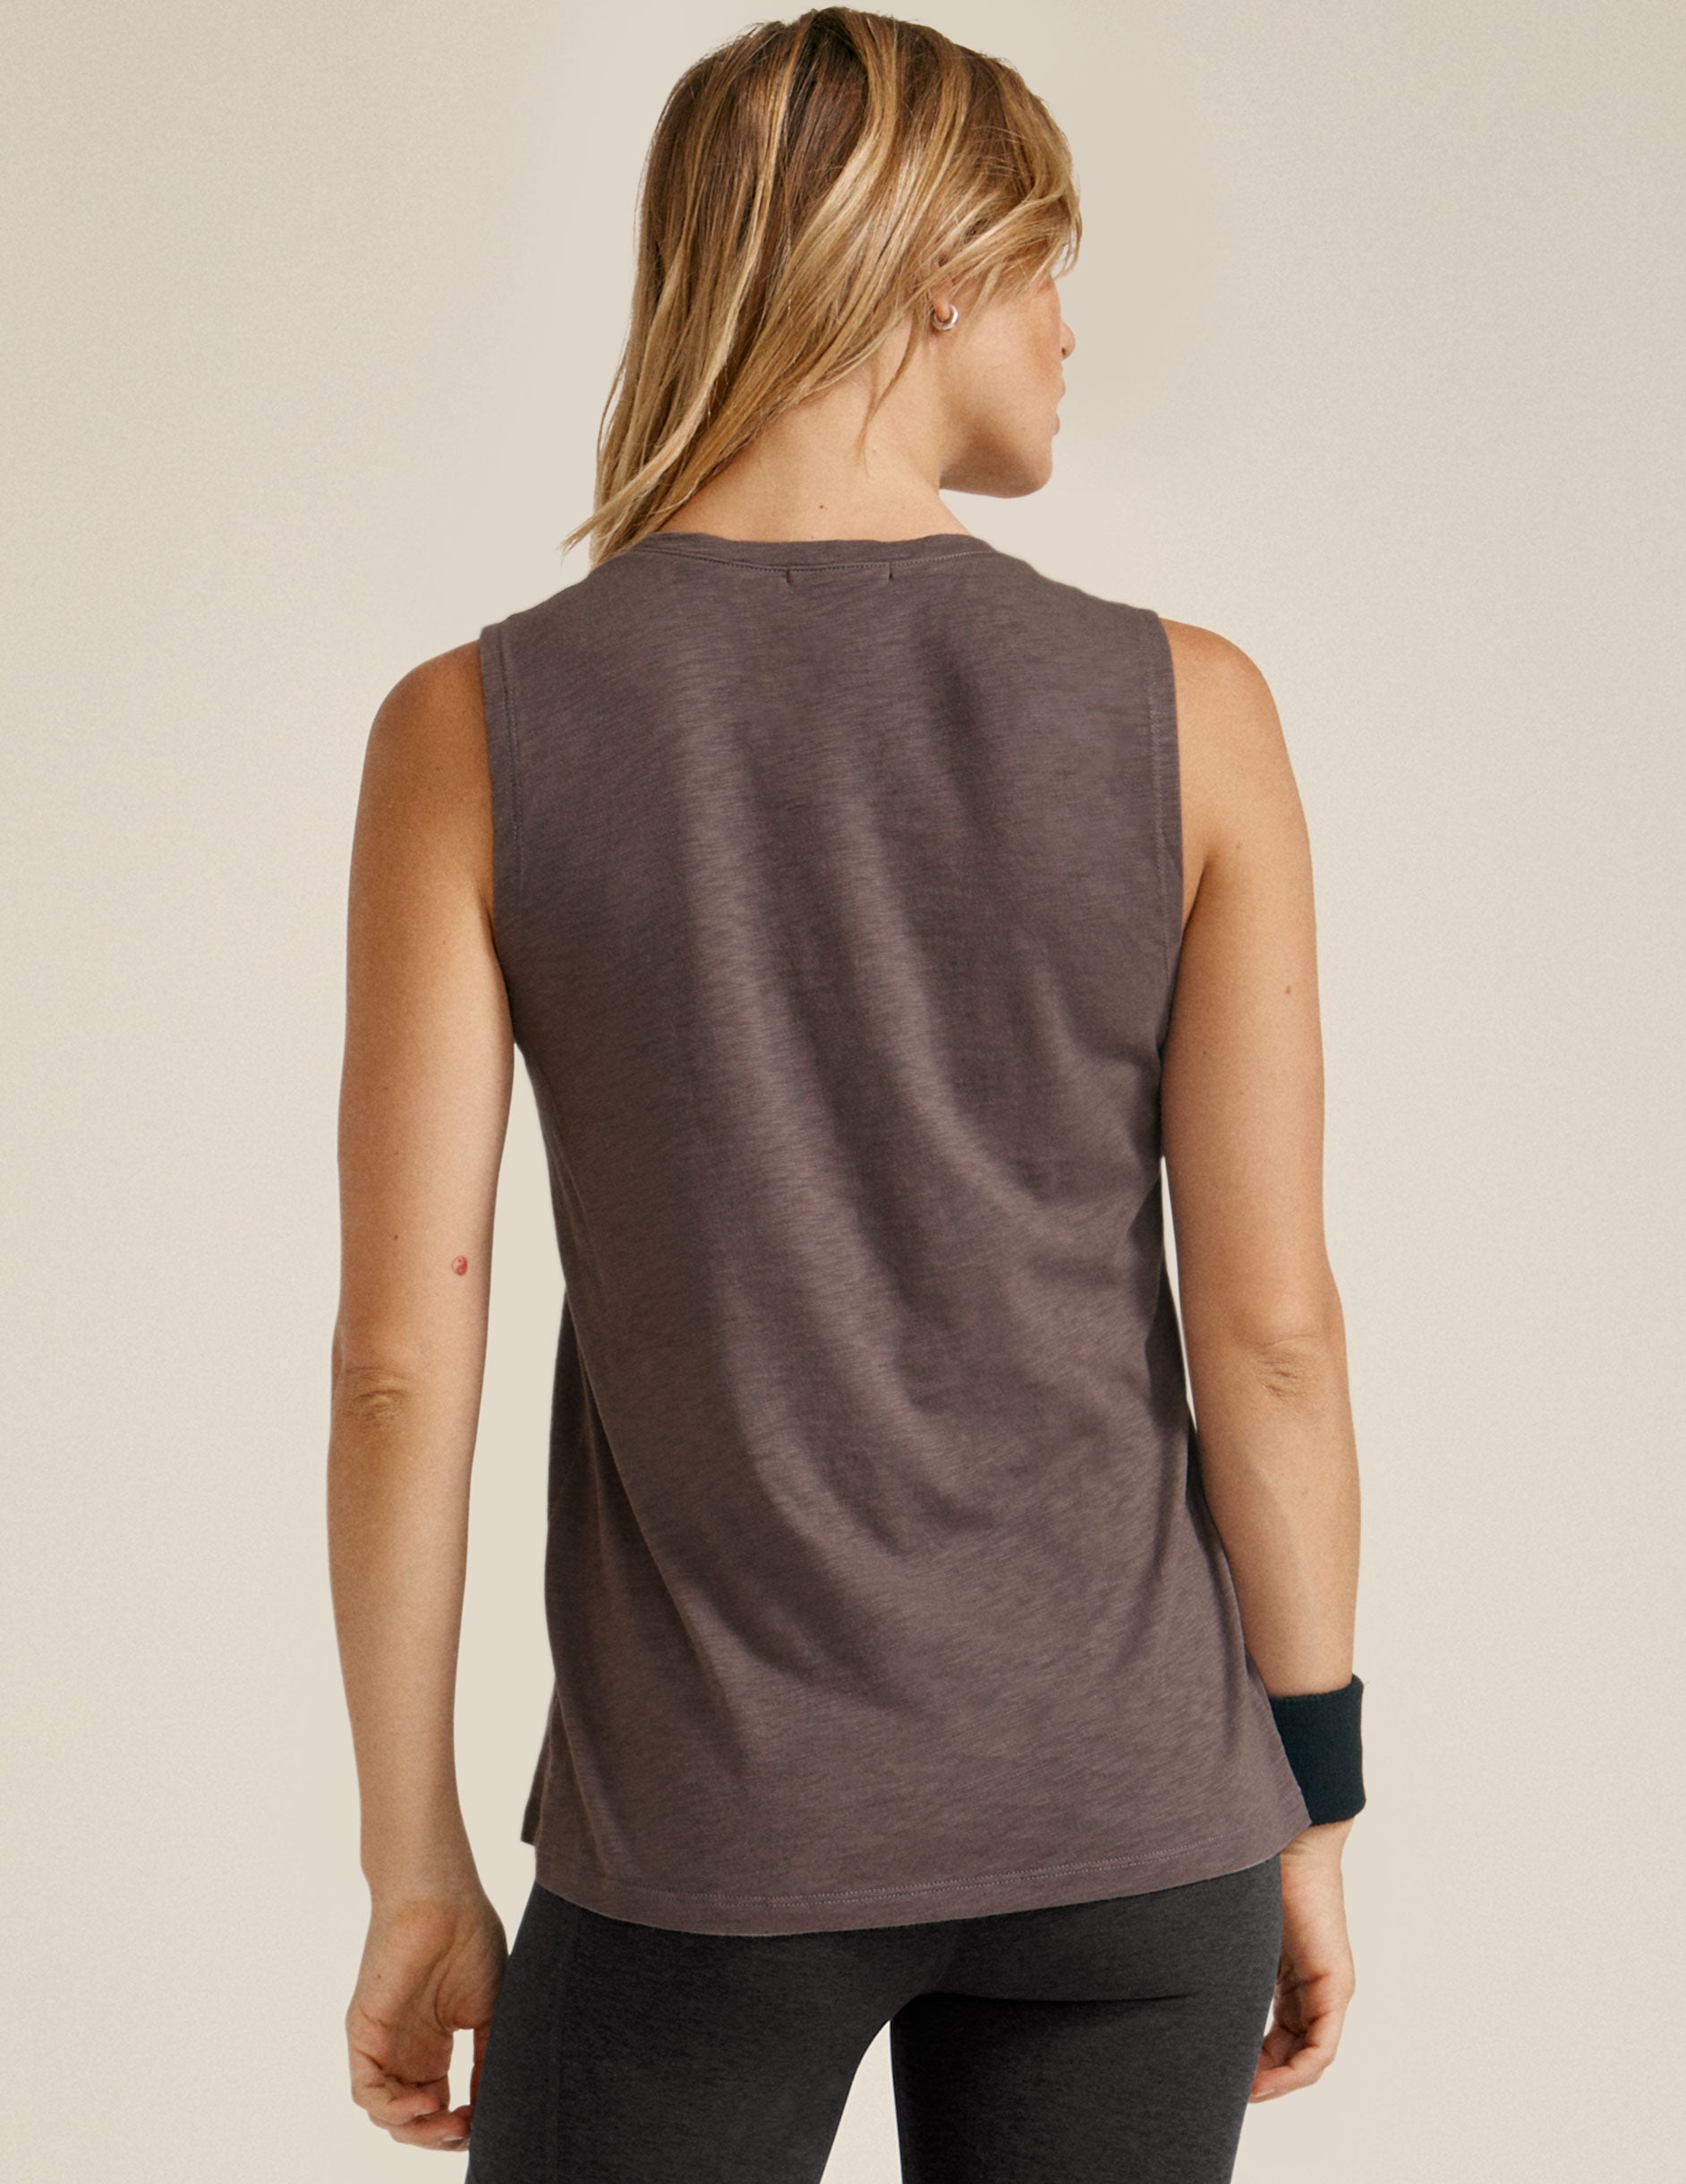 brown scoop neck tank paired with black leggings